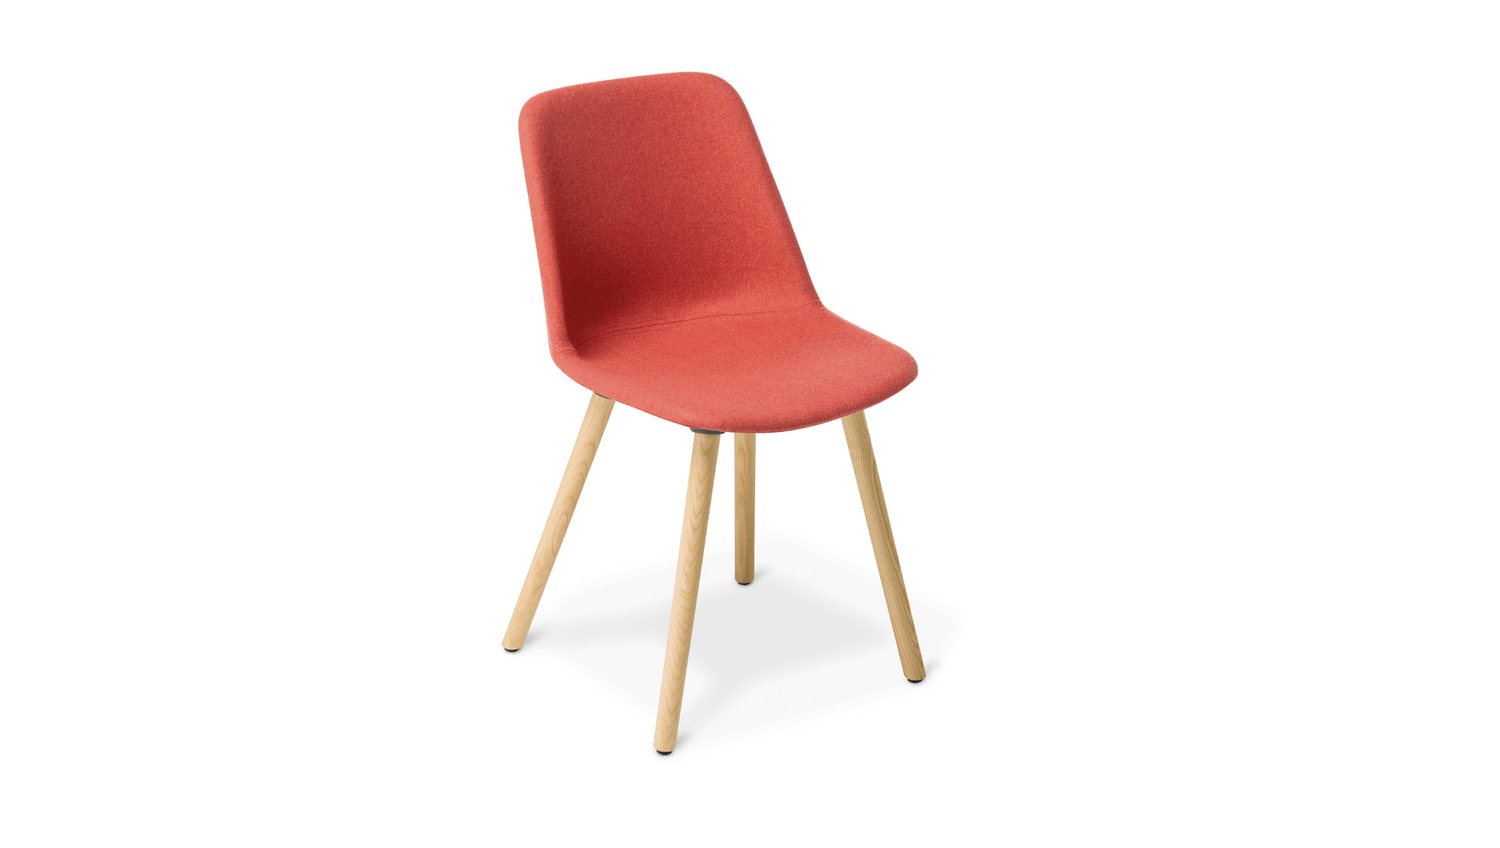 Seating Fully Upholstered / Timber Legs / Natural Ash Max Chair